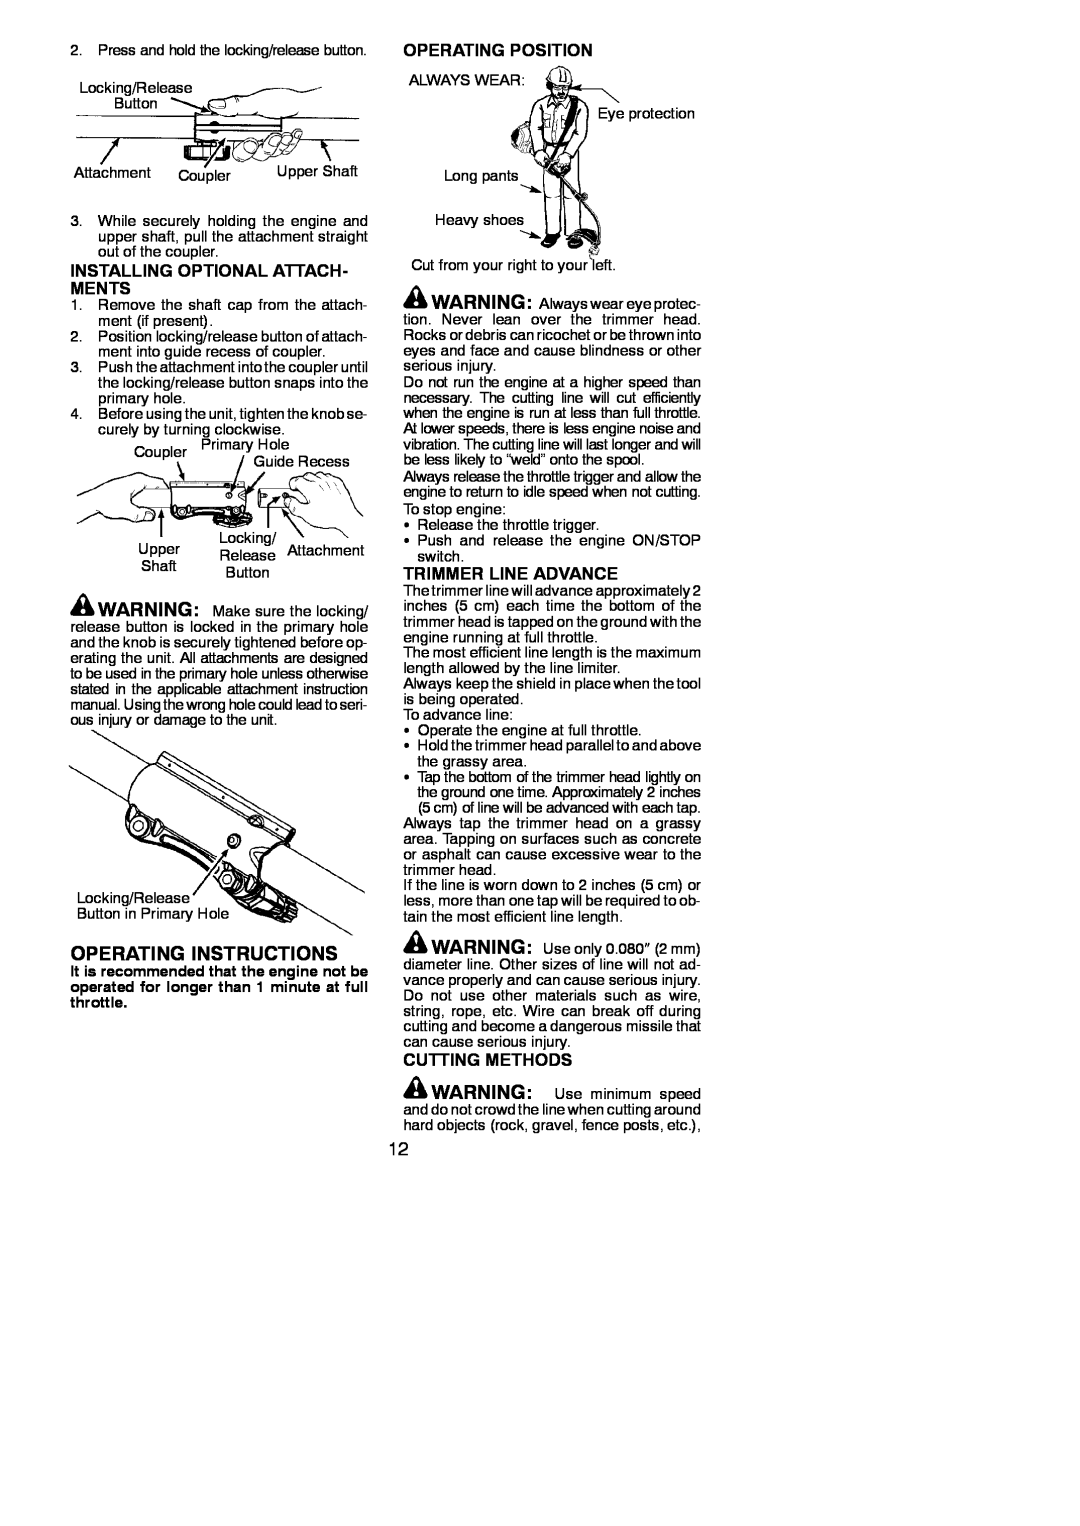 Poulan 952711943 Operating Instructions, Installing Optional Attach- Ments, Operating Position, Trimmer Line Advance 